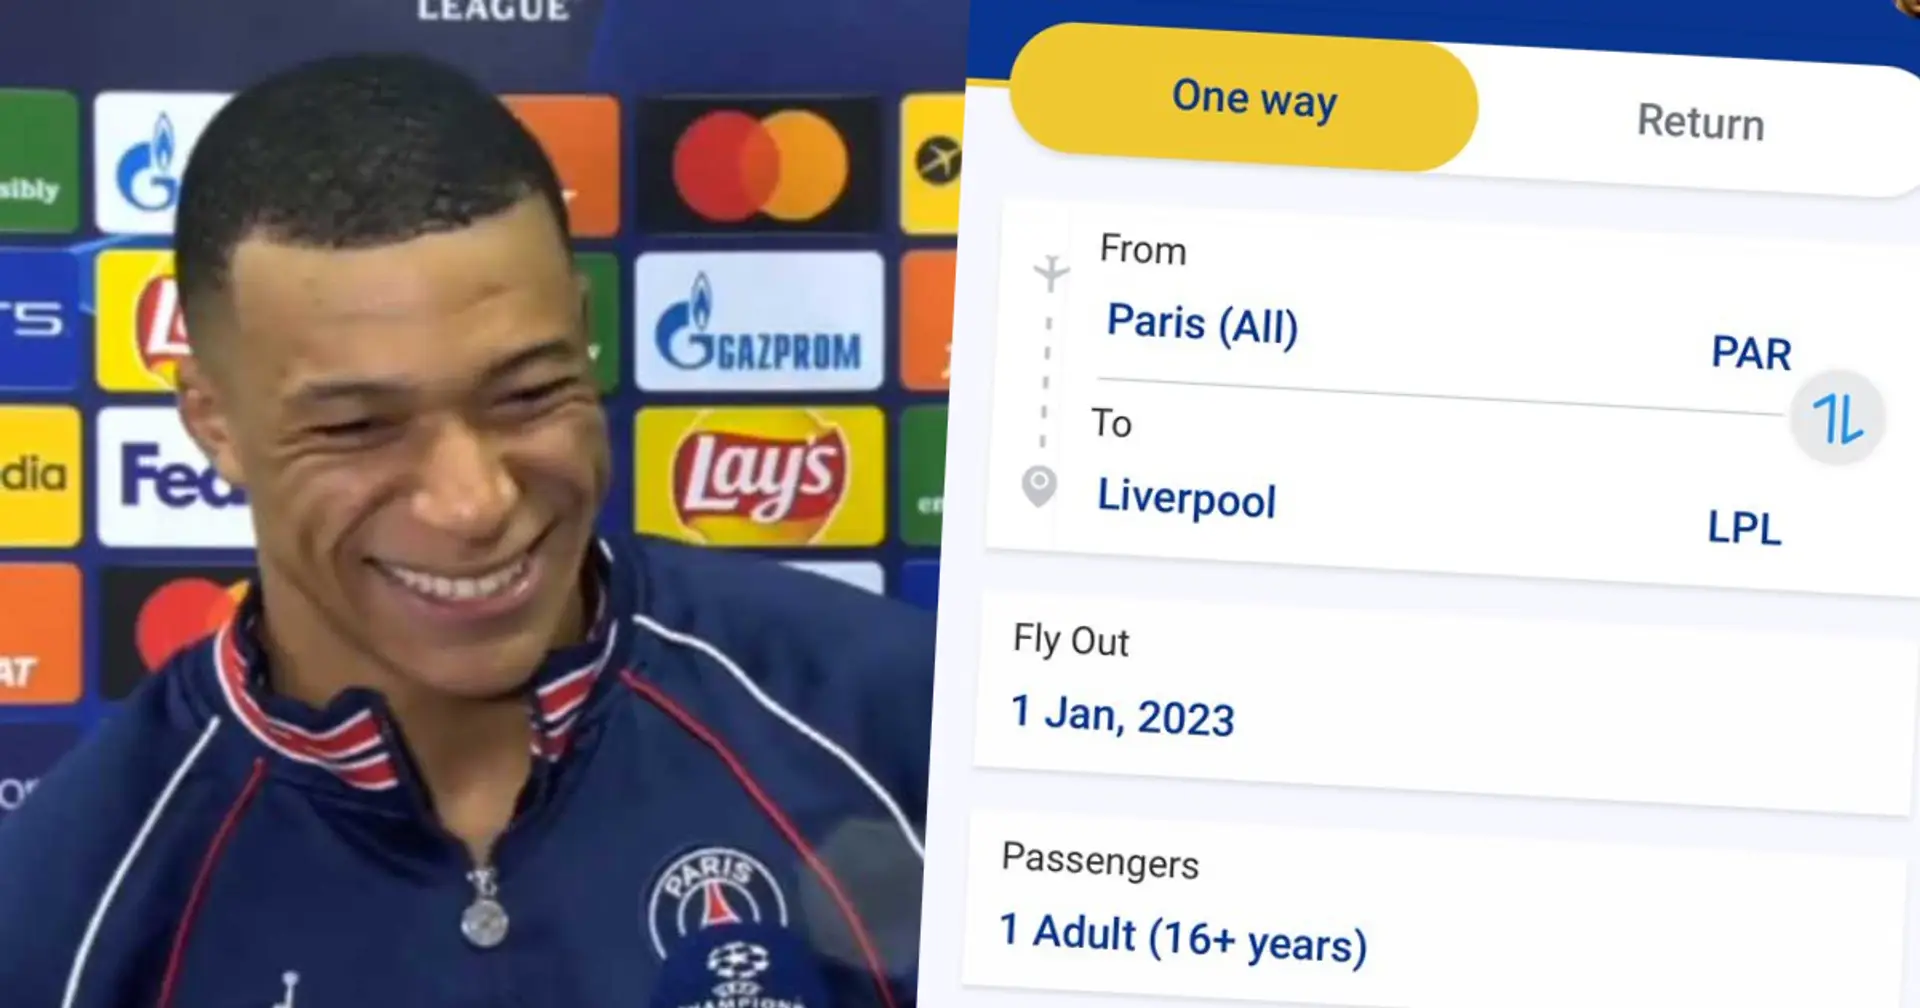 Liverpool Airport to Mbappe: 'Hopefully see you soon'